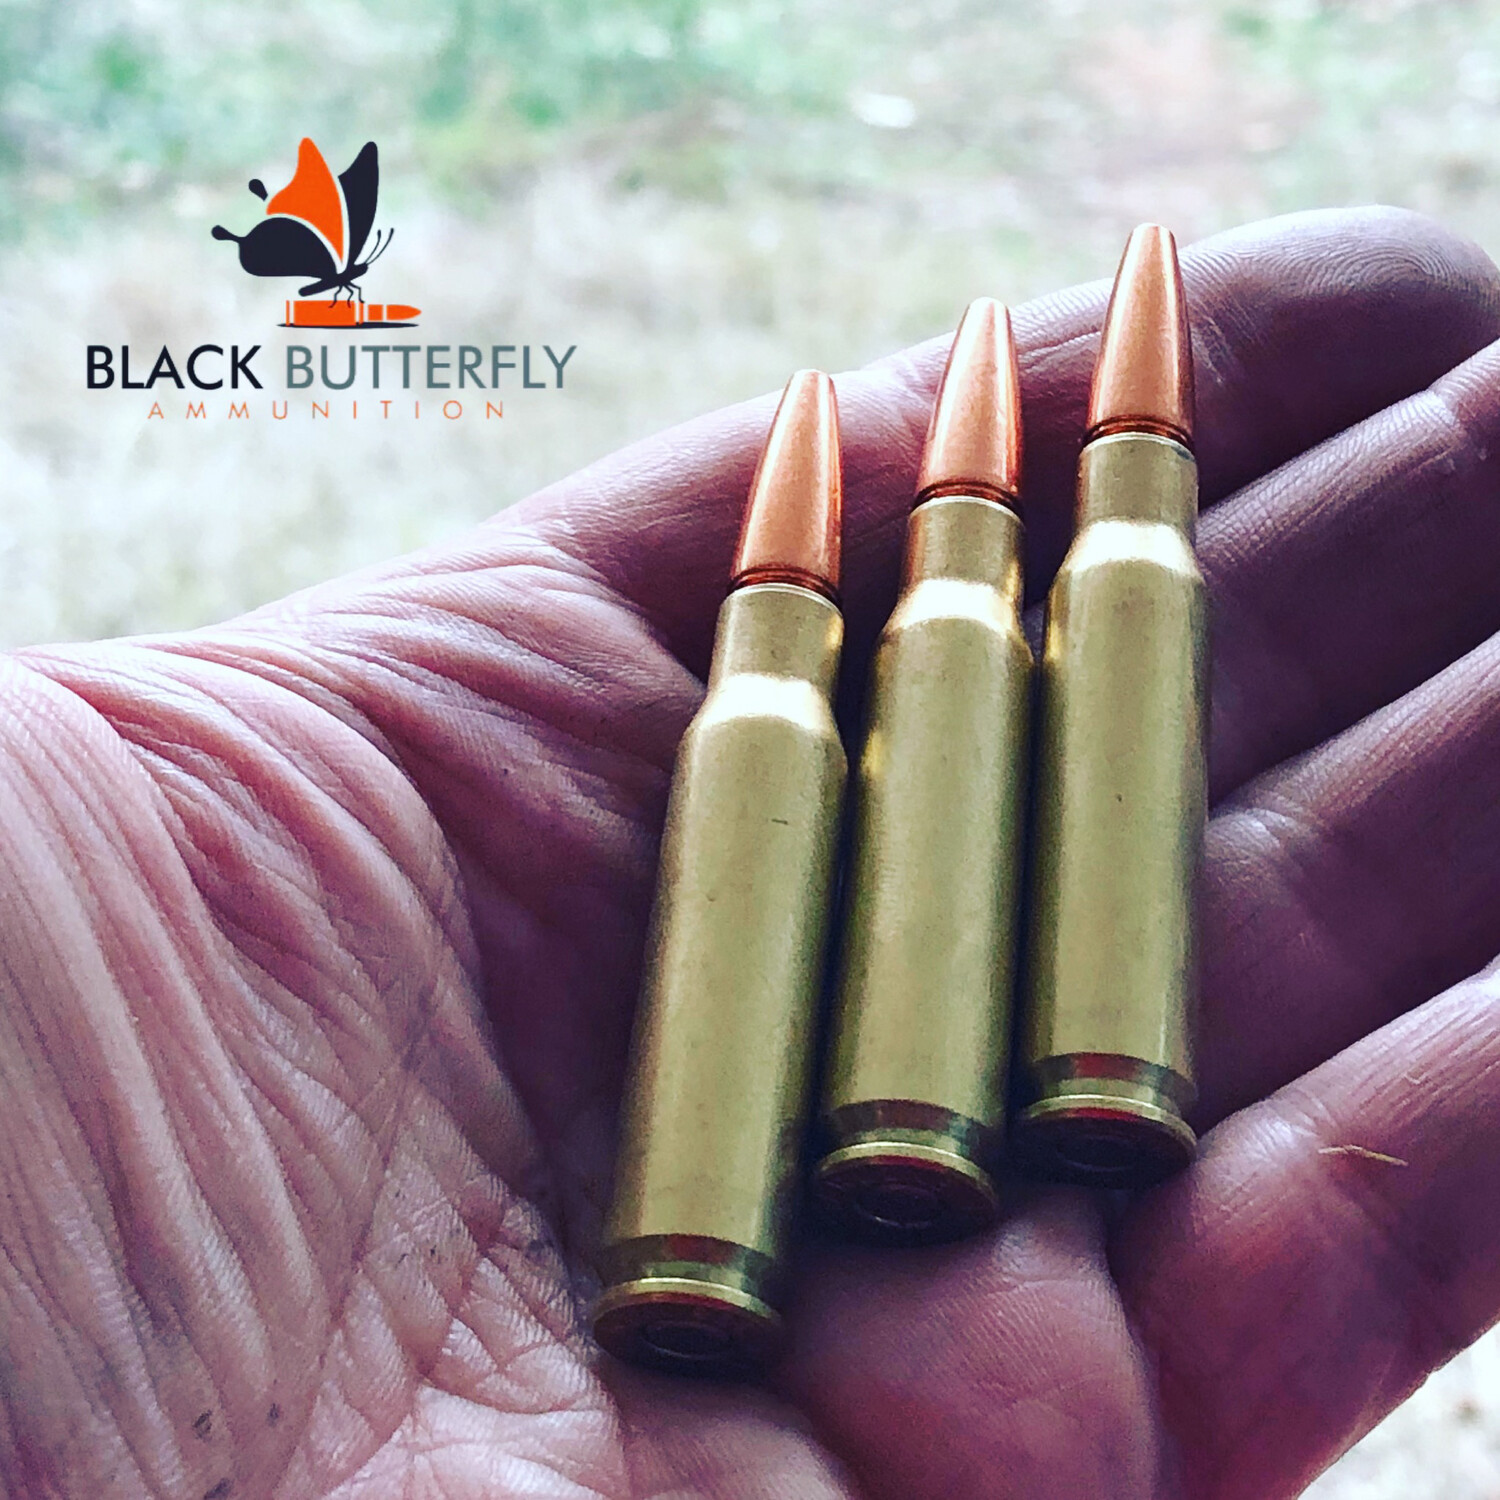 Black Butterfly Ammunition Premium, .308/7.62x51mm, 152 gr., 20 Rounds, Lehigh Defense Controlled Chaos (2625 AMV)